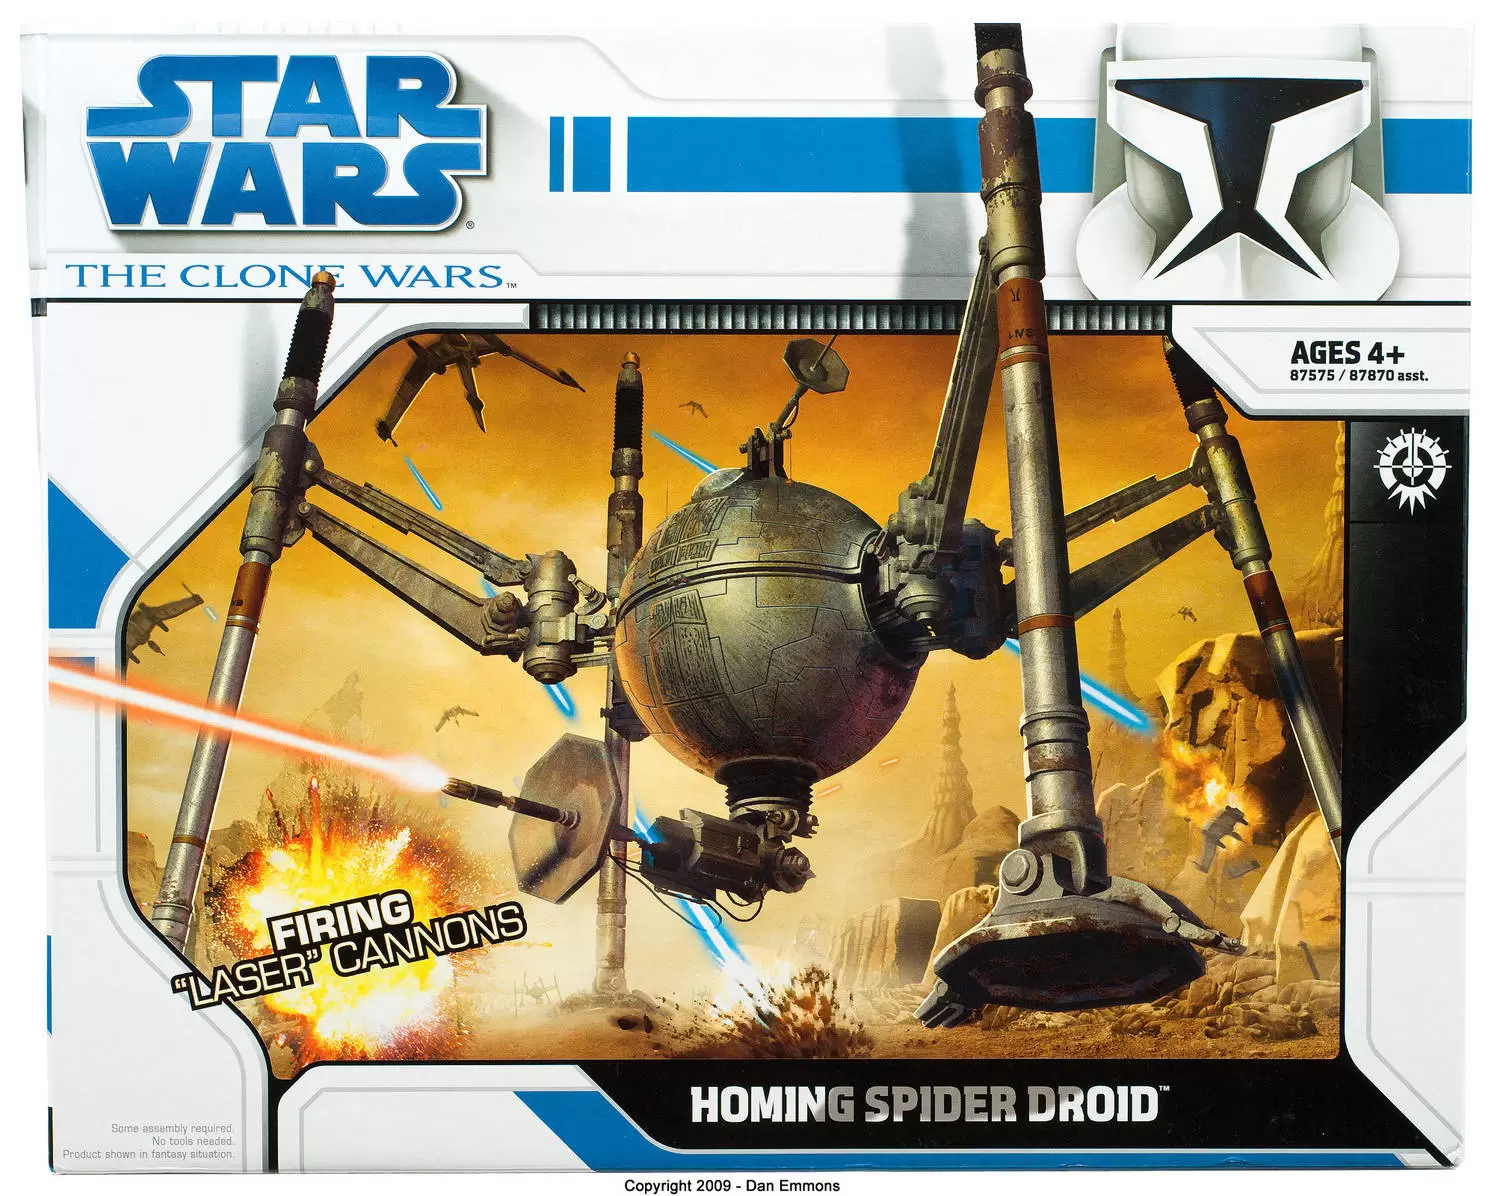 The Clone Wars (TCW 2008) - Homing Spider Droid